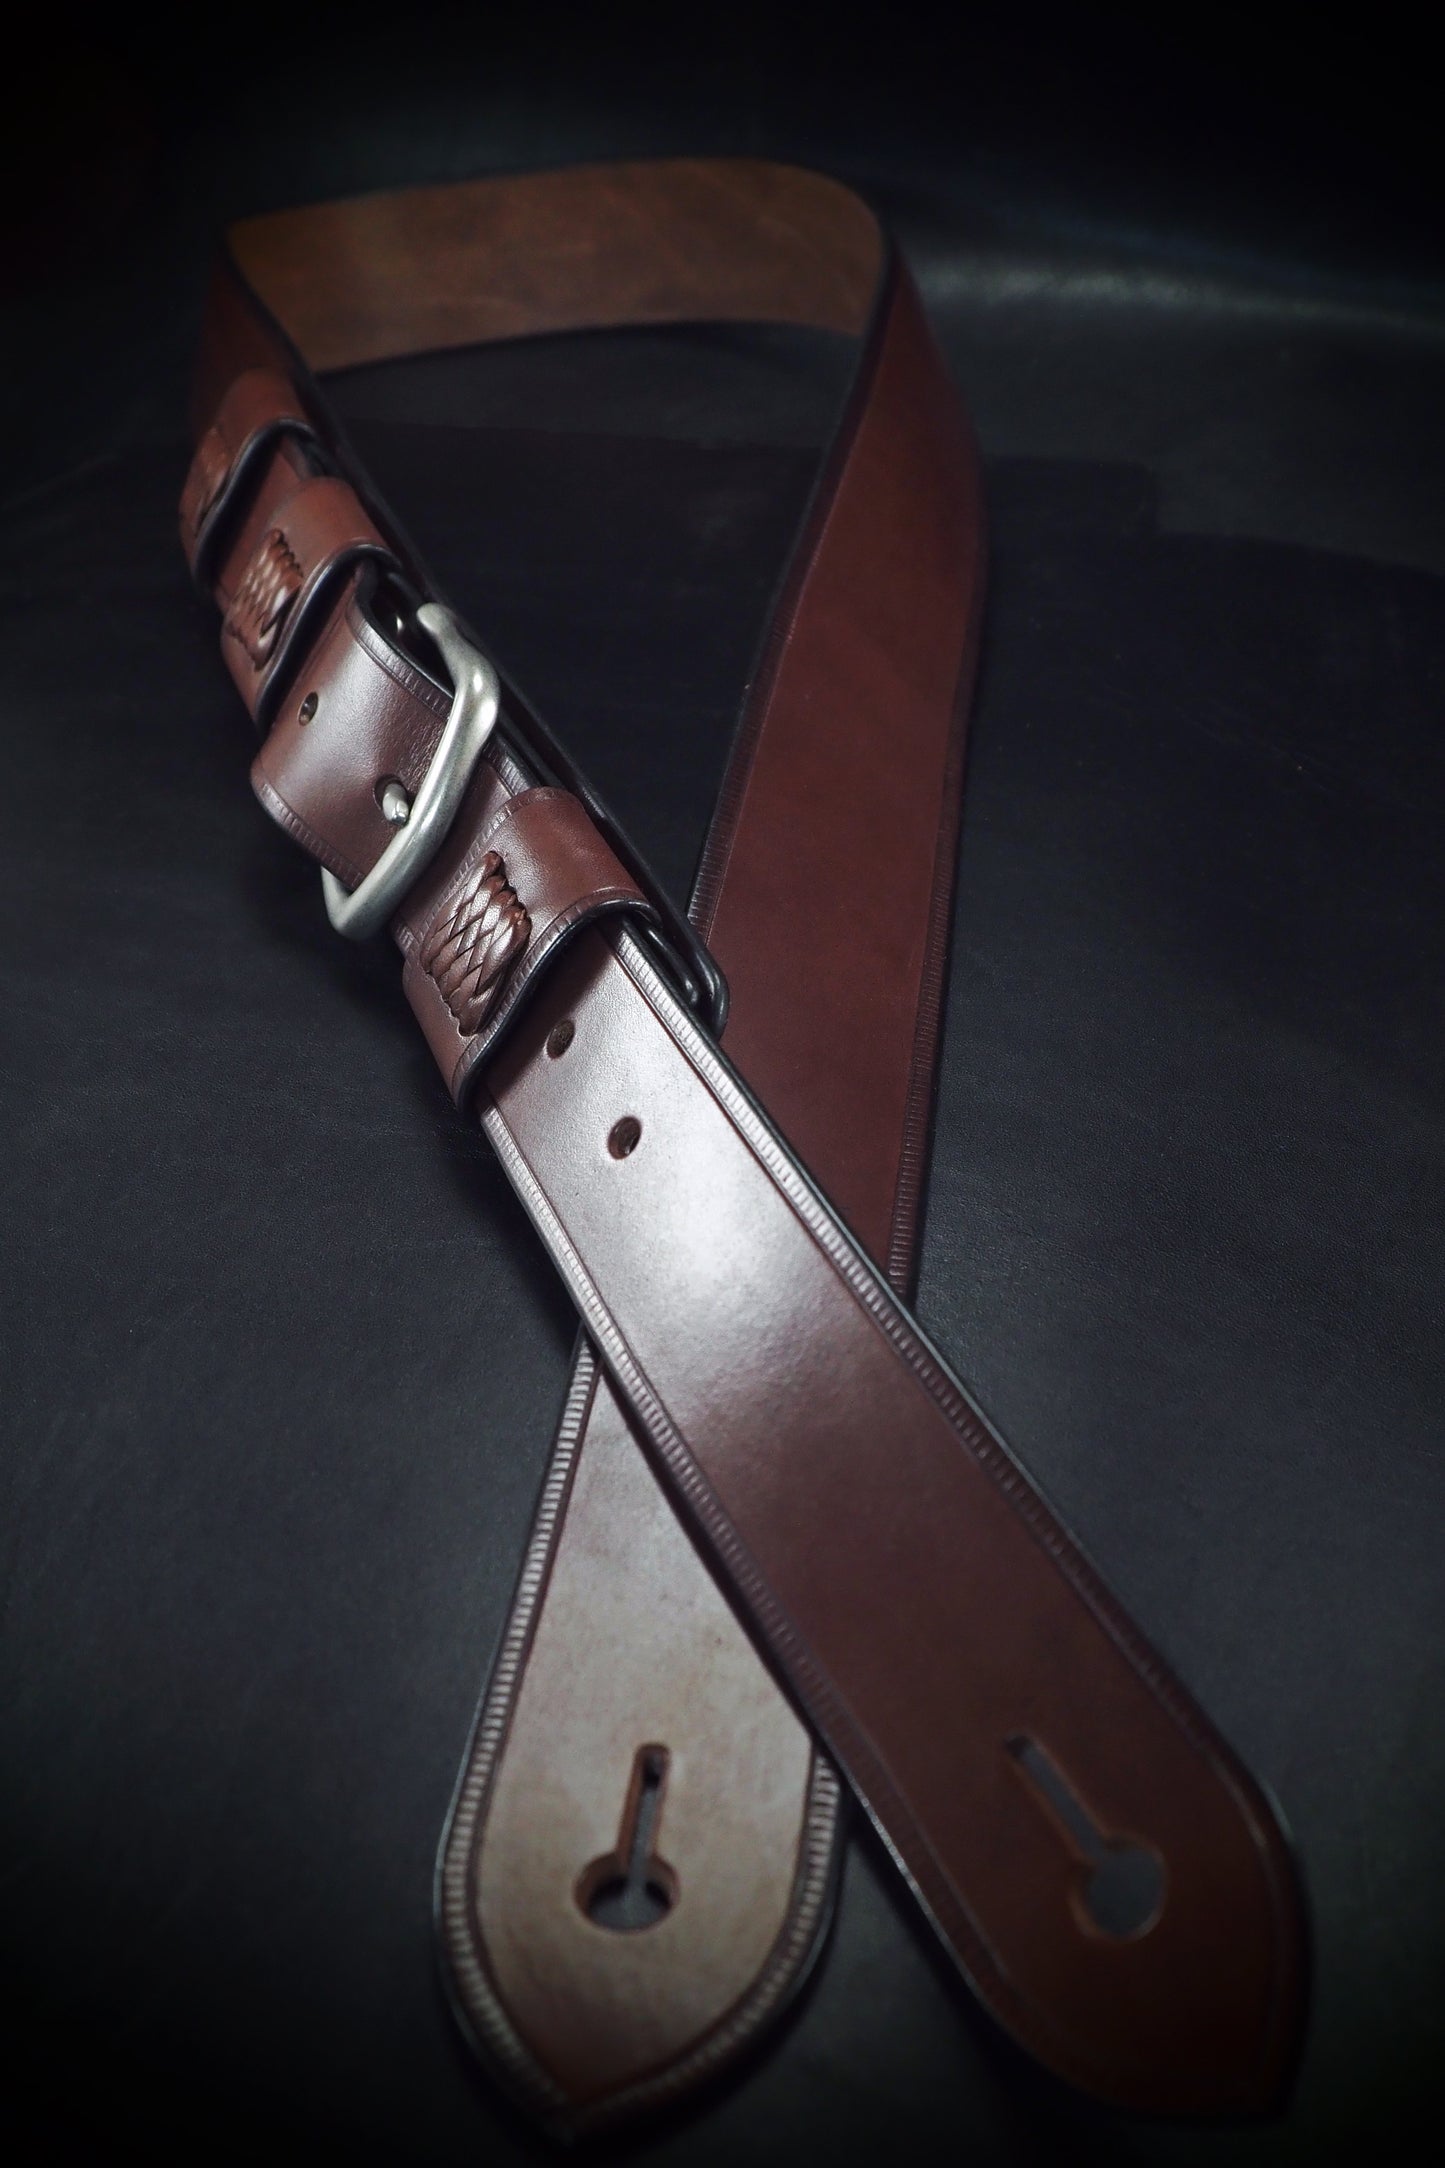 Brown braided bridle leather Vintage style guitar strap!